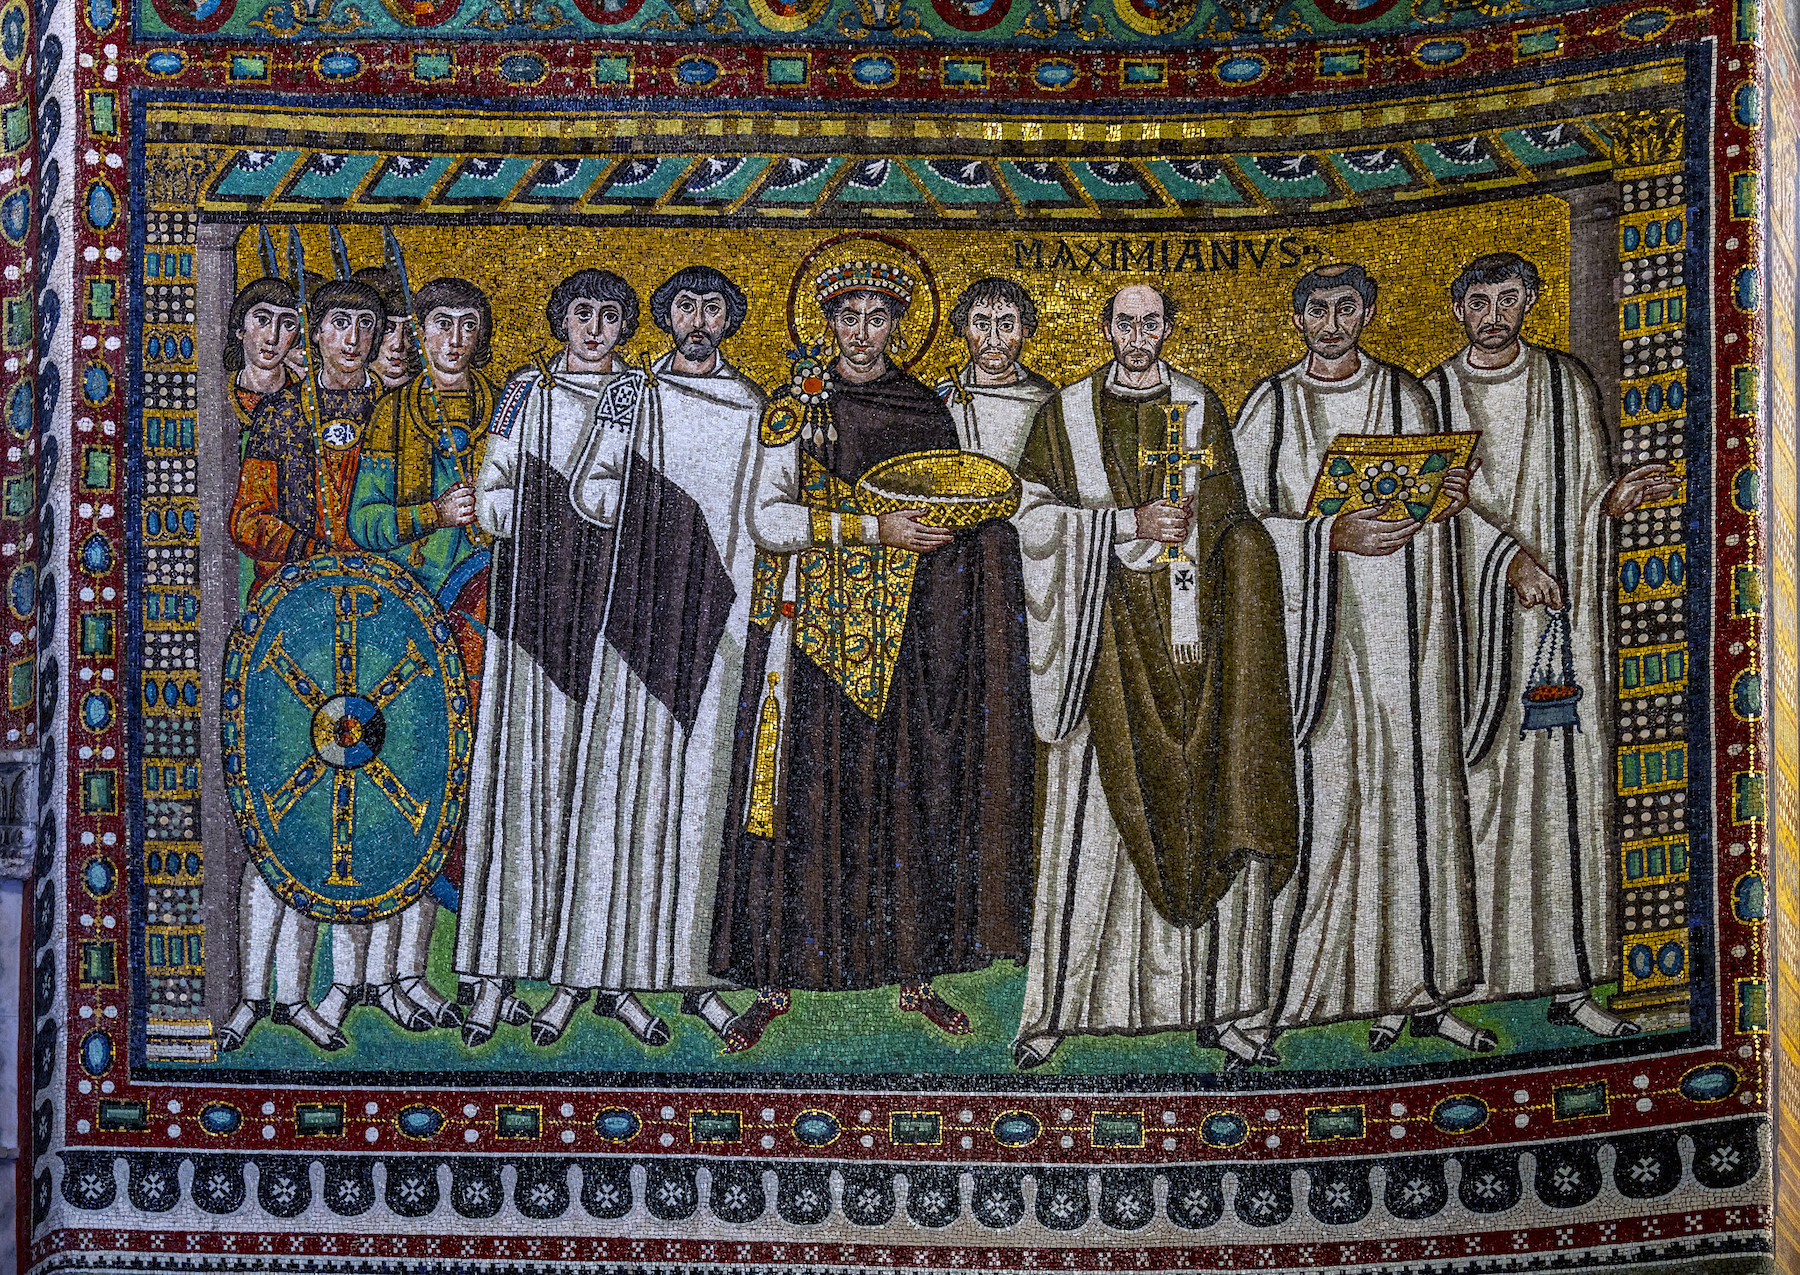 <p>-c. 547 C.E. Ravenna, Italy</p><ul><li><p>the main theme is the authority of the emperor in the Christian plan of history</p></li><li><p>Justinian is frontal in the center of the mosaic; he wears a purple robe and a crown, surrounded by members of the clergy</p></li><li><p>The left figure is the Bishop Maximianus of Ravenna, and the right is members of the imperial administration with purple stripes on their robes trailed by soldiers</p></li><li><p>they carry a censer, the gospel book, the cross, and the bowl for the bread of the Eucharist. _Justinian&apos;s Mosaic sits adjacent to the mosaic of Christ, who is also dressed in a purple robe. _Justinian overlaps standing with the pope making him the closest to the viewer</p></li></ul>